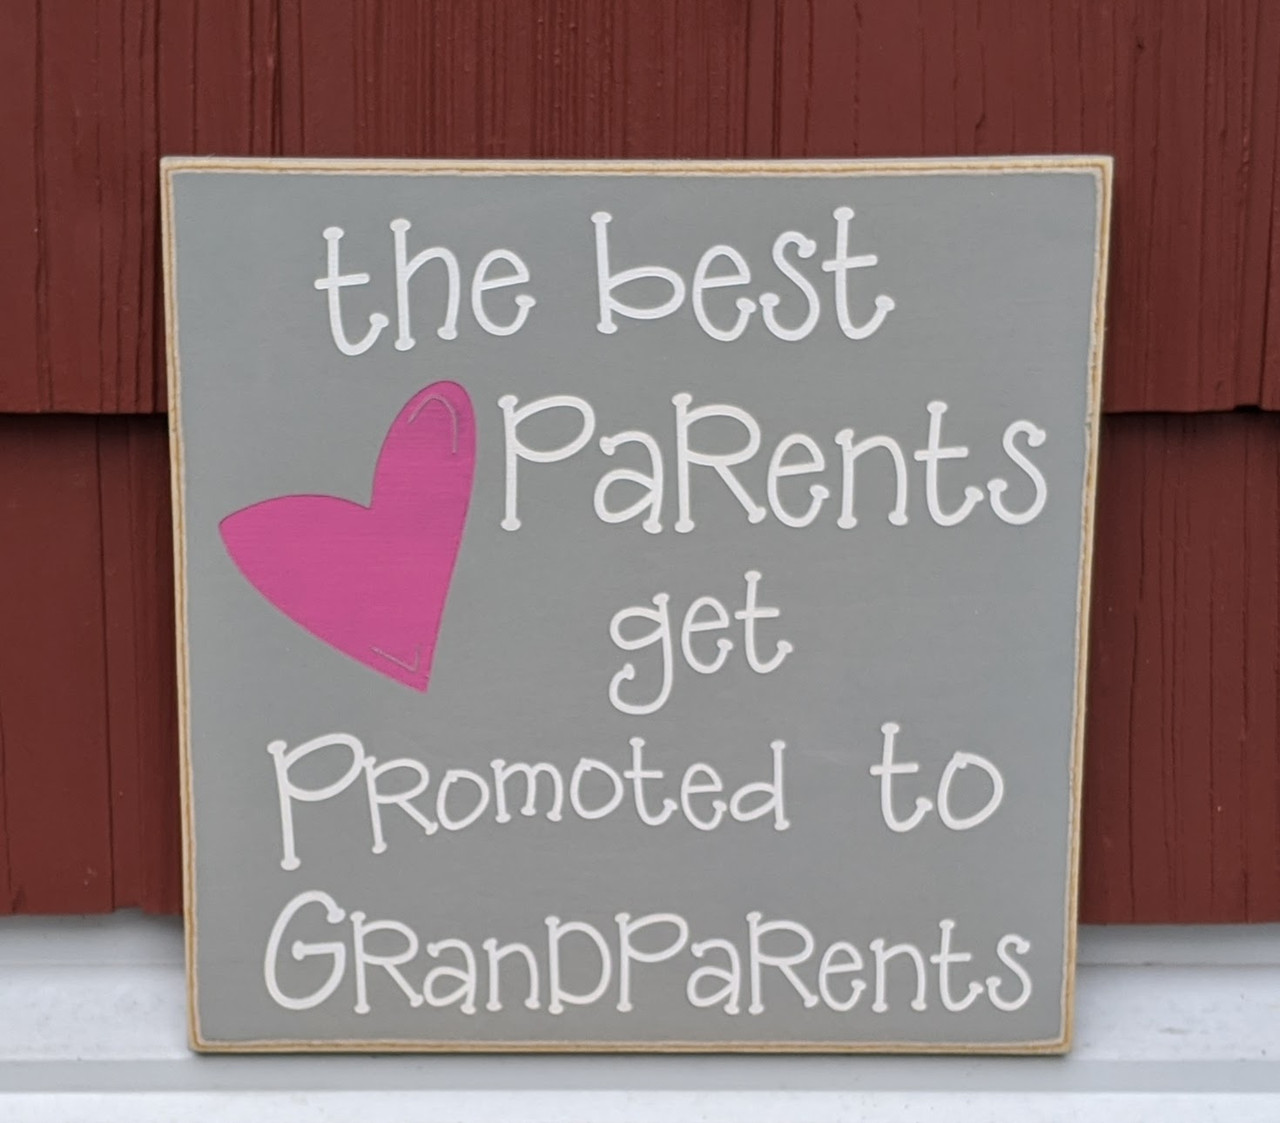 The Best Parents Get Promoted to Grandparents